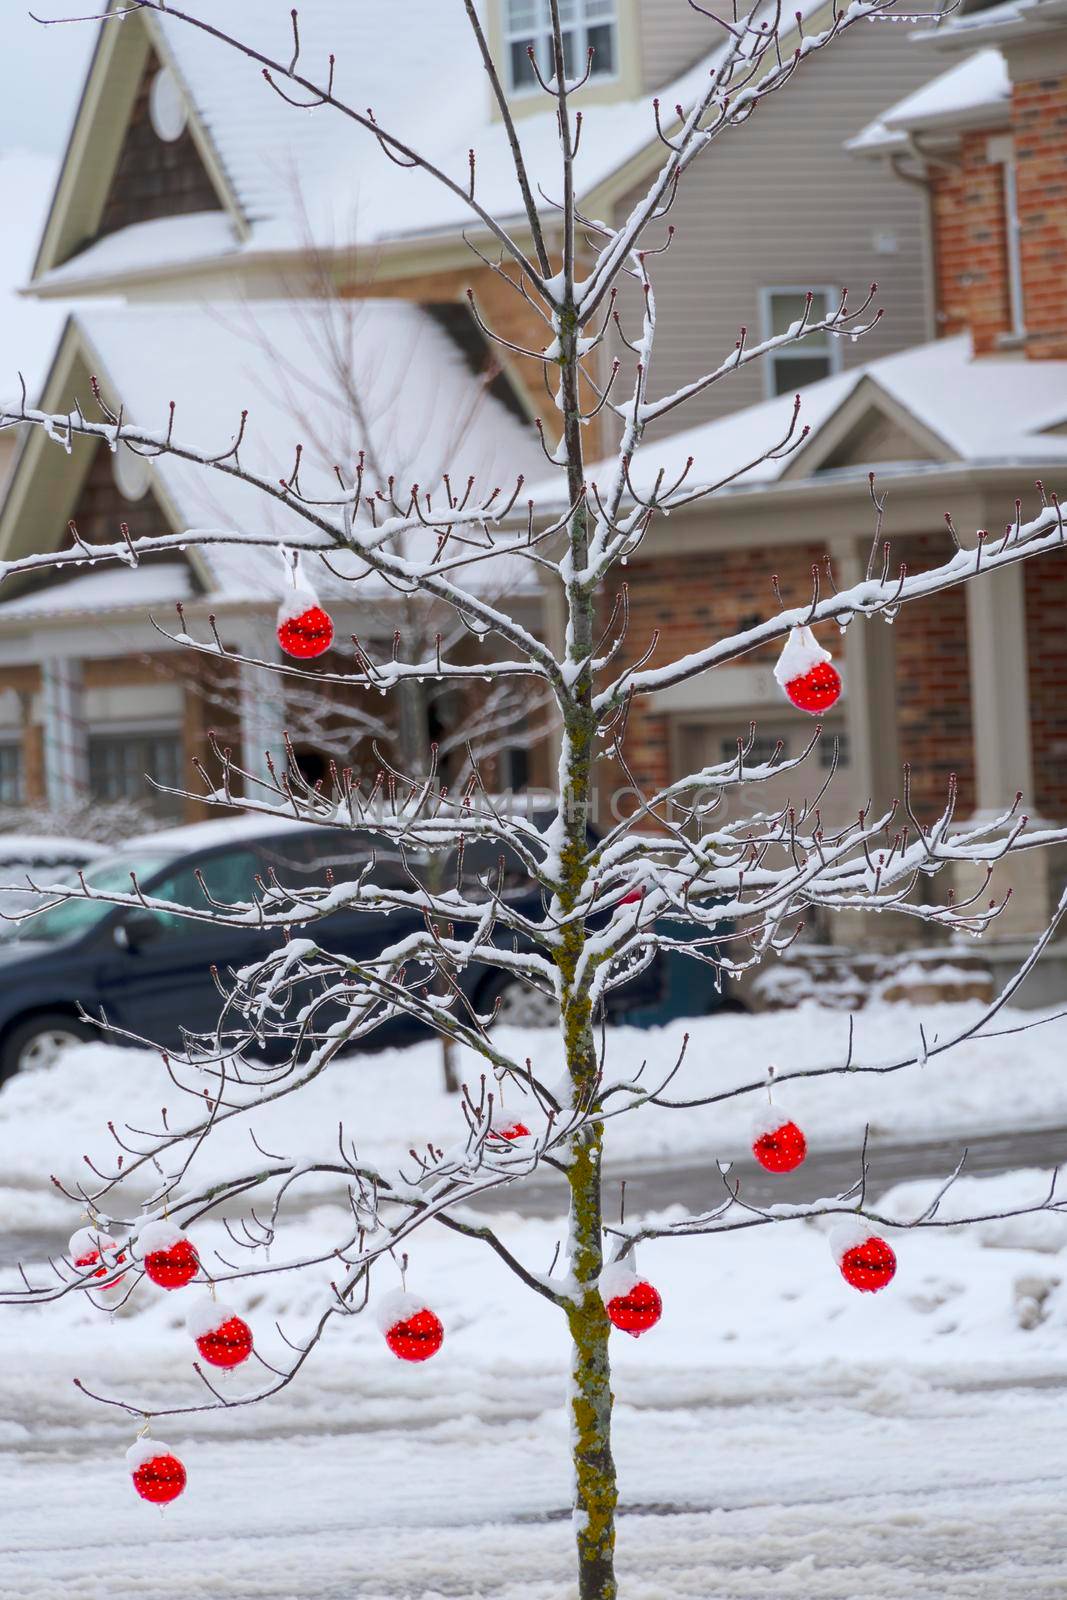 Children decorated a tree in the yard with red balls for the holiday